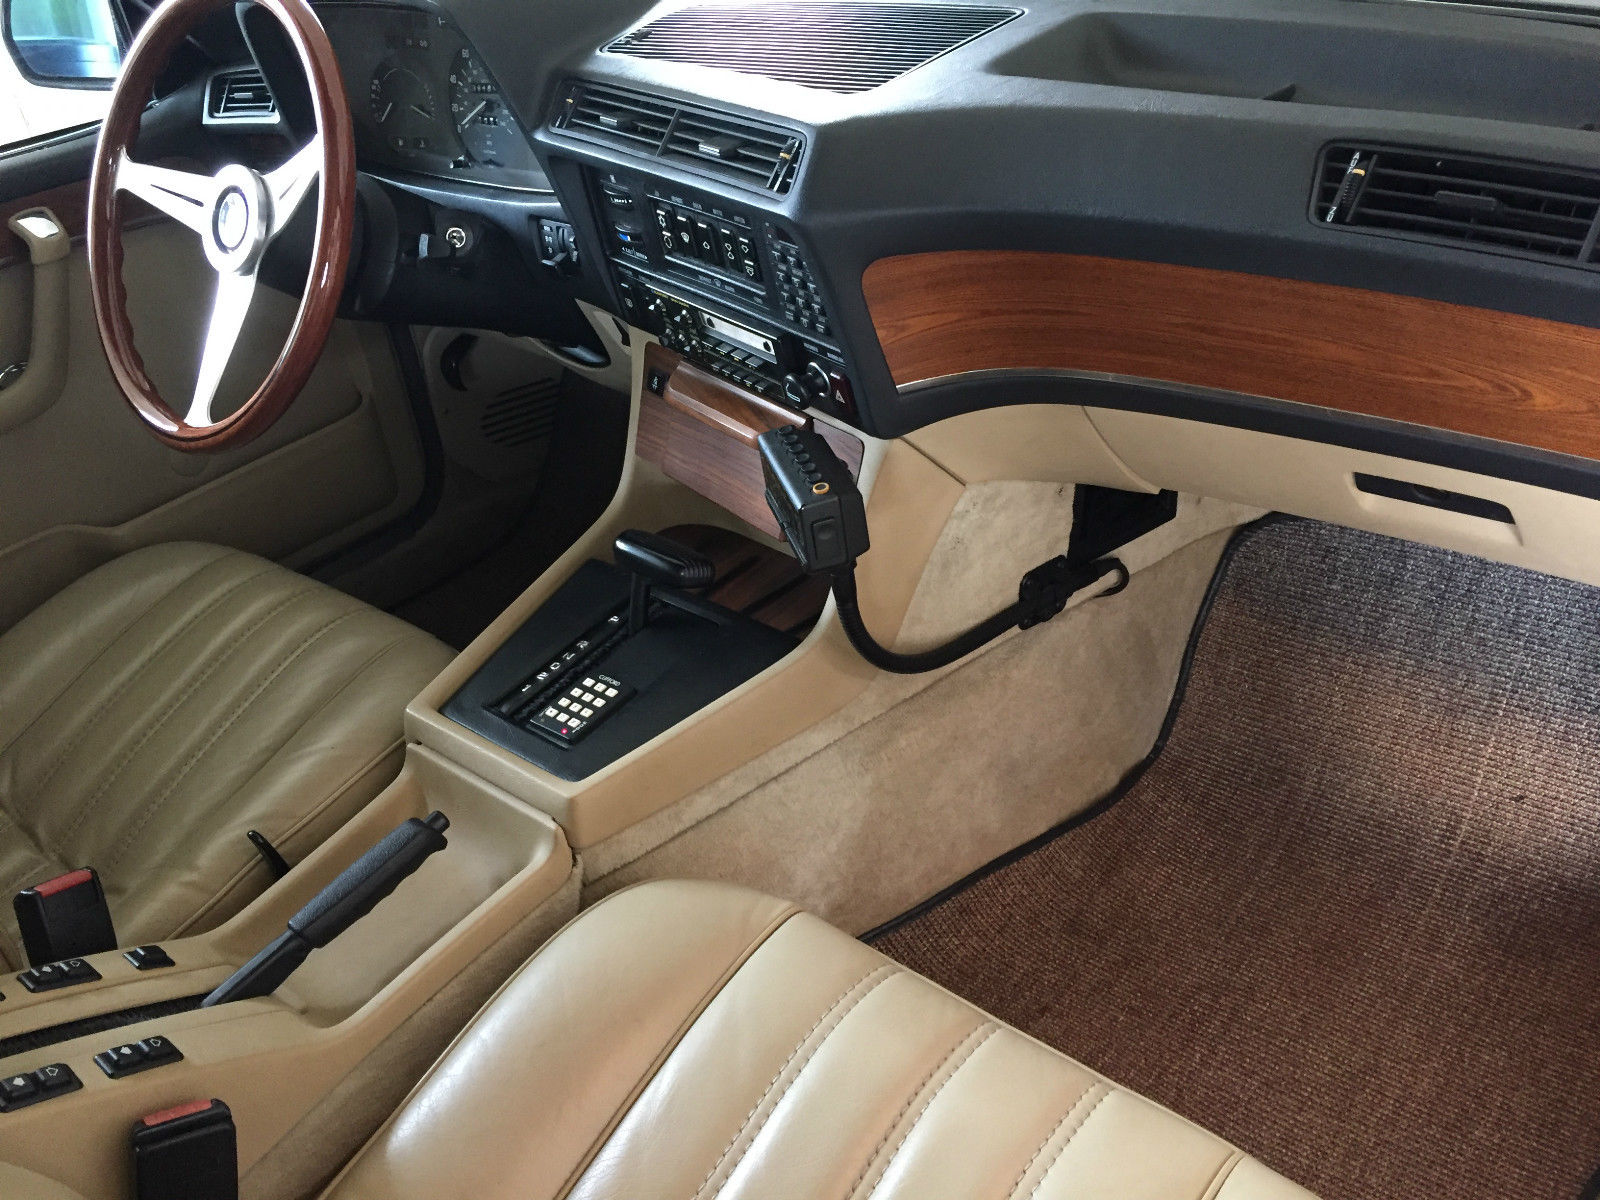 Feature Listing 1981 Bmw 745i Turbo With 31 700 Miles